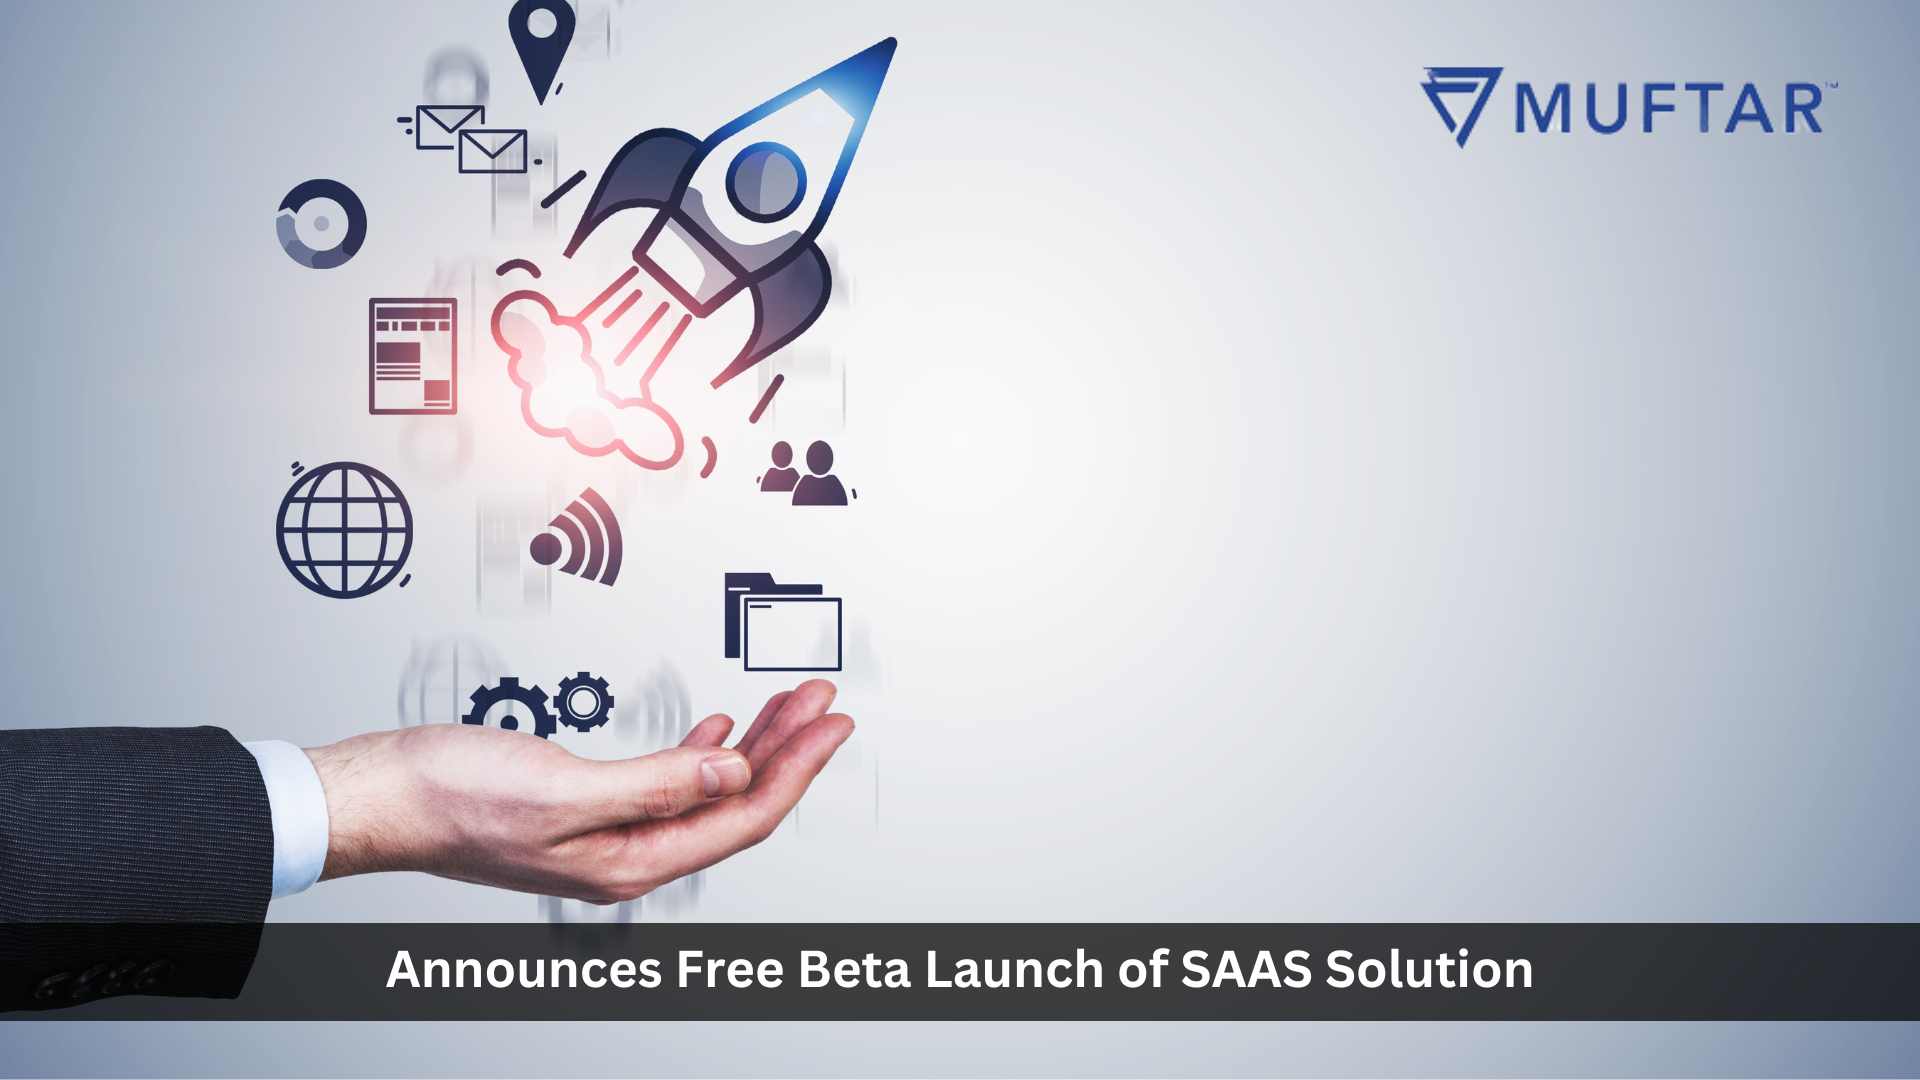 Muftar Announces Free Beta Launch of SaaS Solution to Digitize and Drive Efficiency in Transportation Industry